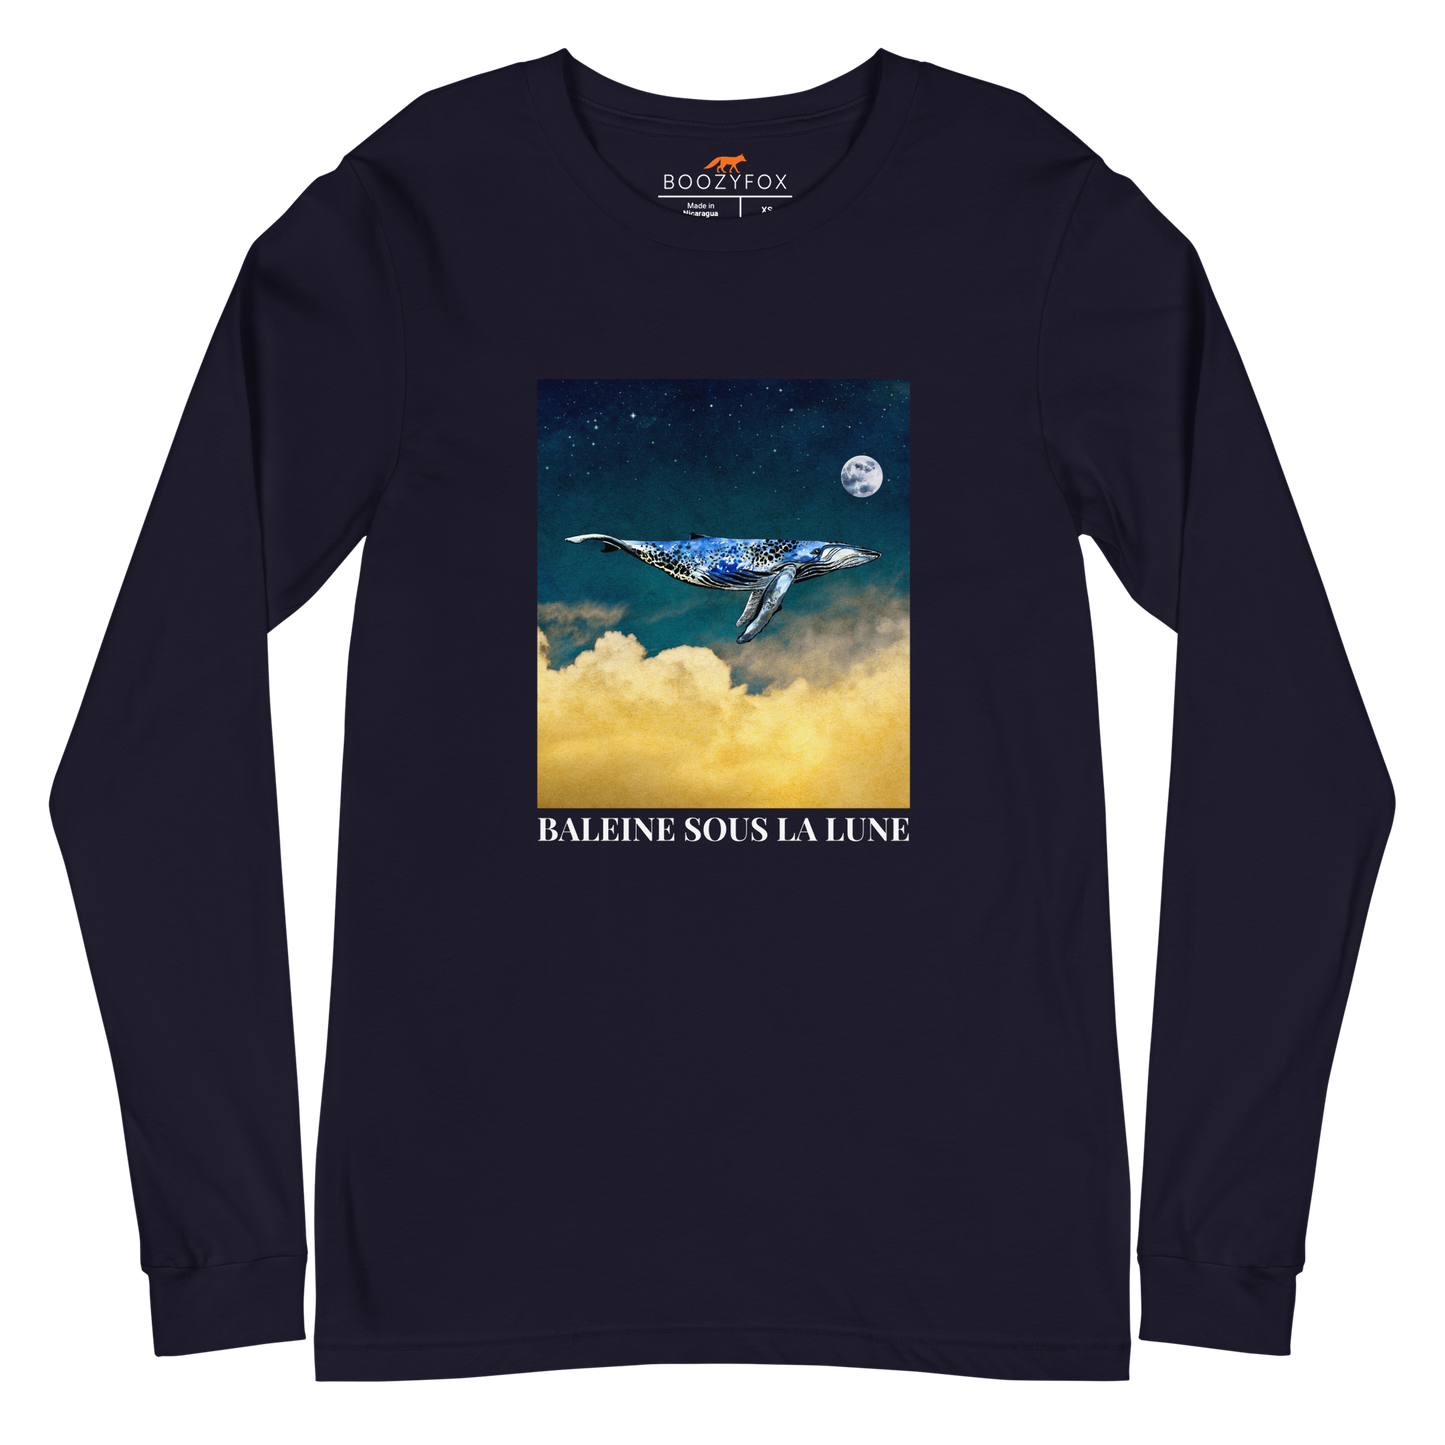 Navy Whale Long Sleeve Tee featuring a majestic Whale Under The Moon graphic on the chest - Cool Whale Long Sleeve Graphic Tees - Boozy Fox